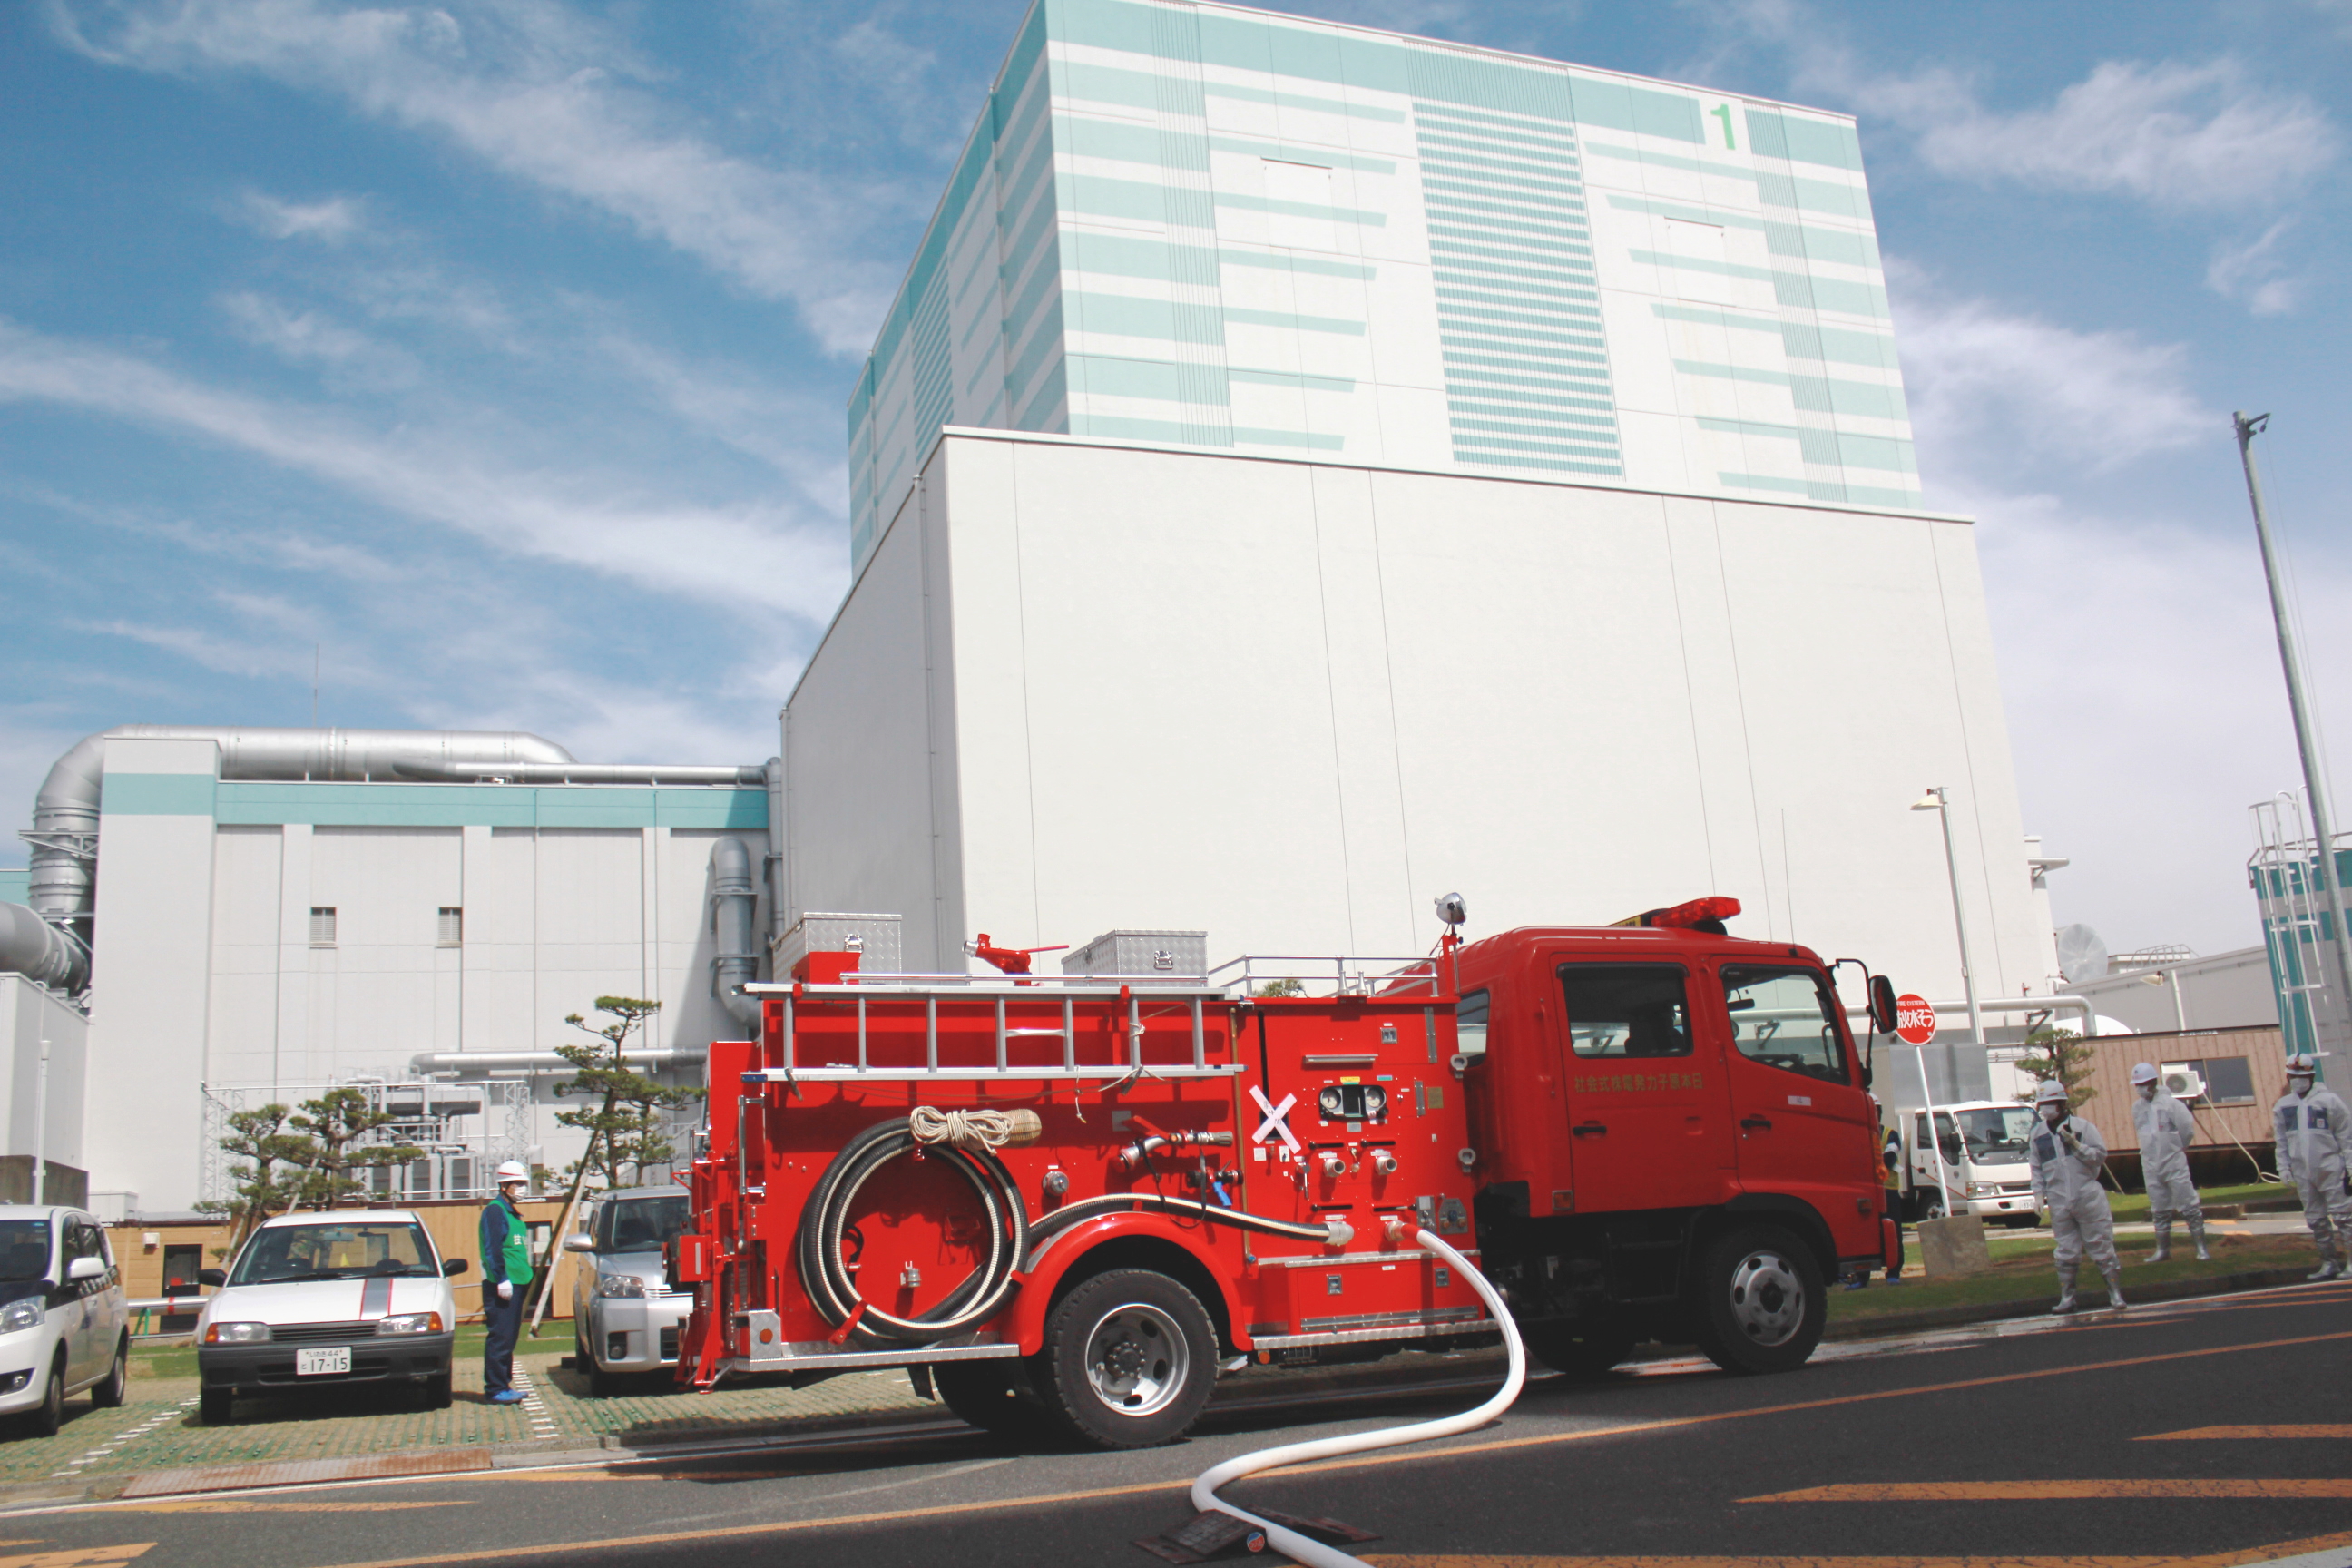 Transporting the water to the reactor building using a fire engine (Unit 1)